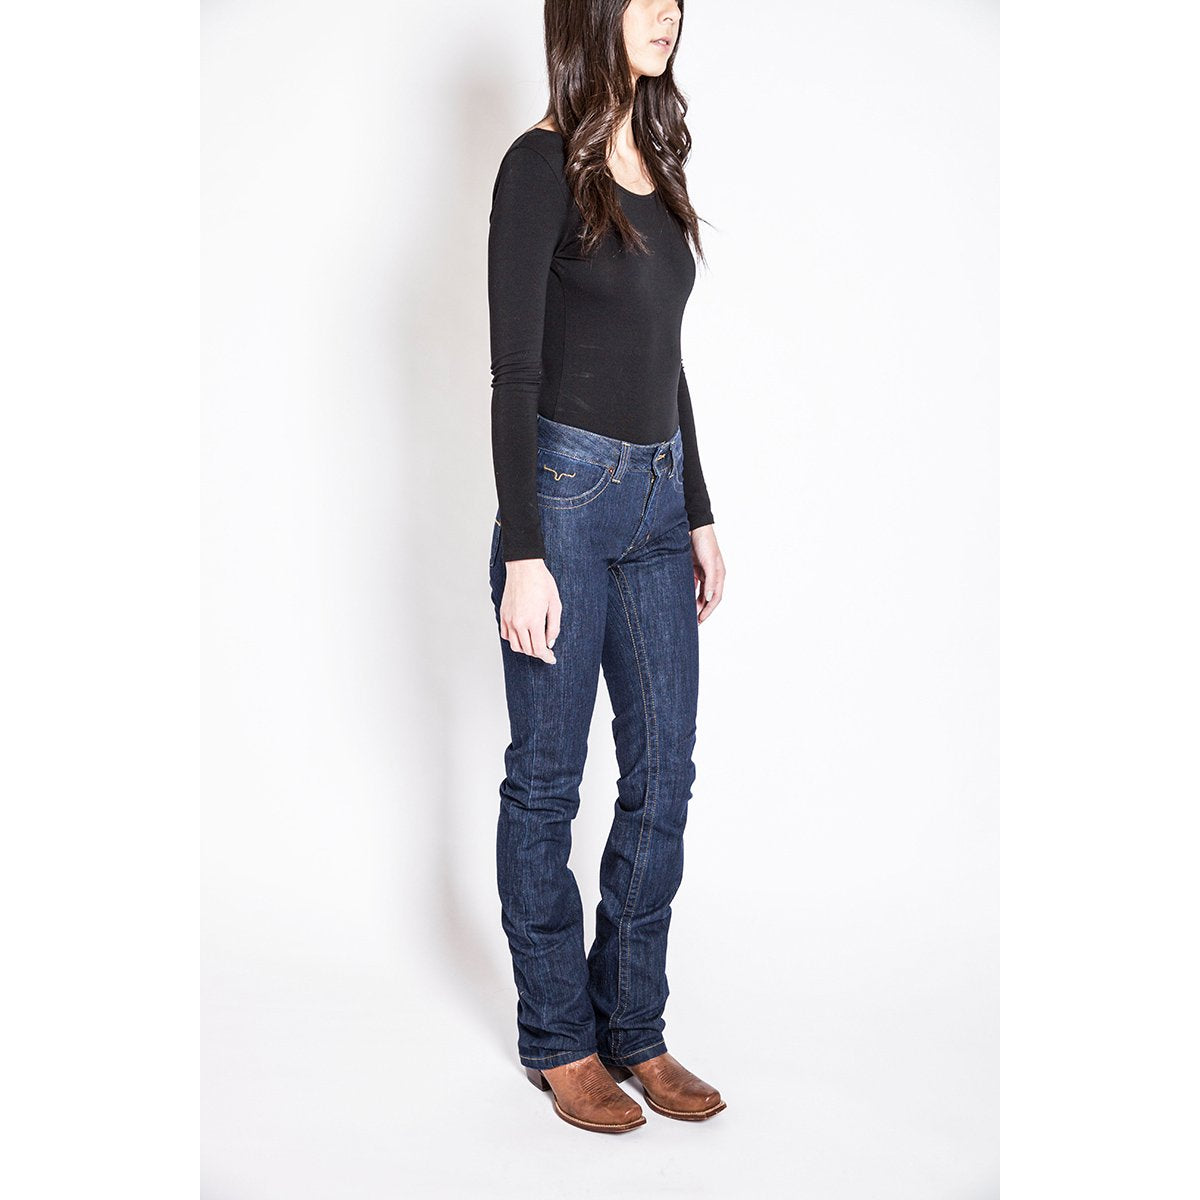 Kimes Ranch Jeans Product Review - Decidedly Equestrian